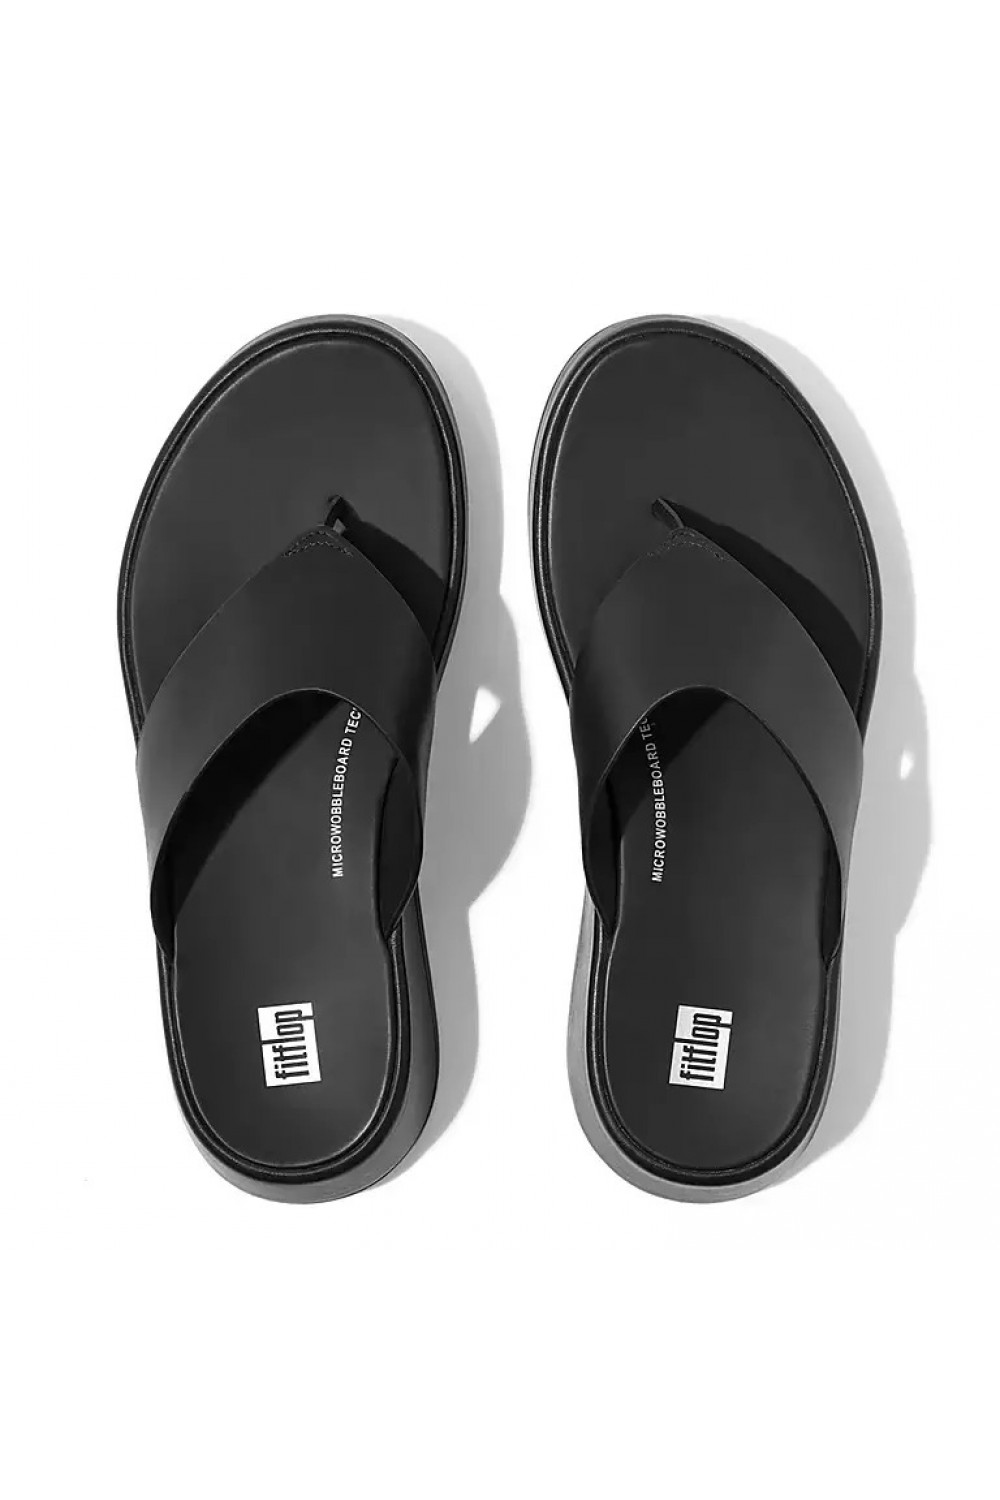 Fitflop F-MODE Luxe Leather Flatform Toe-Post Sandals All Black